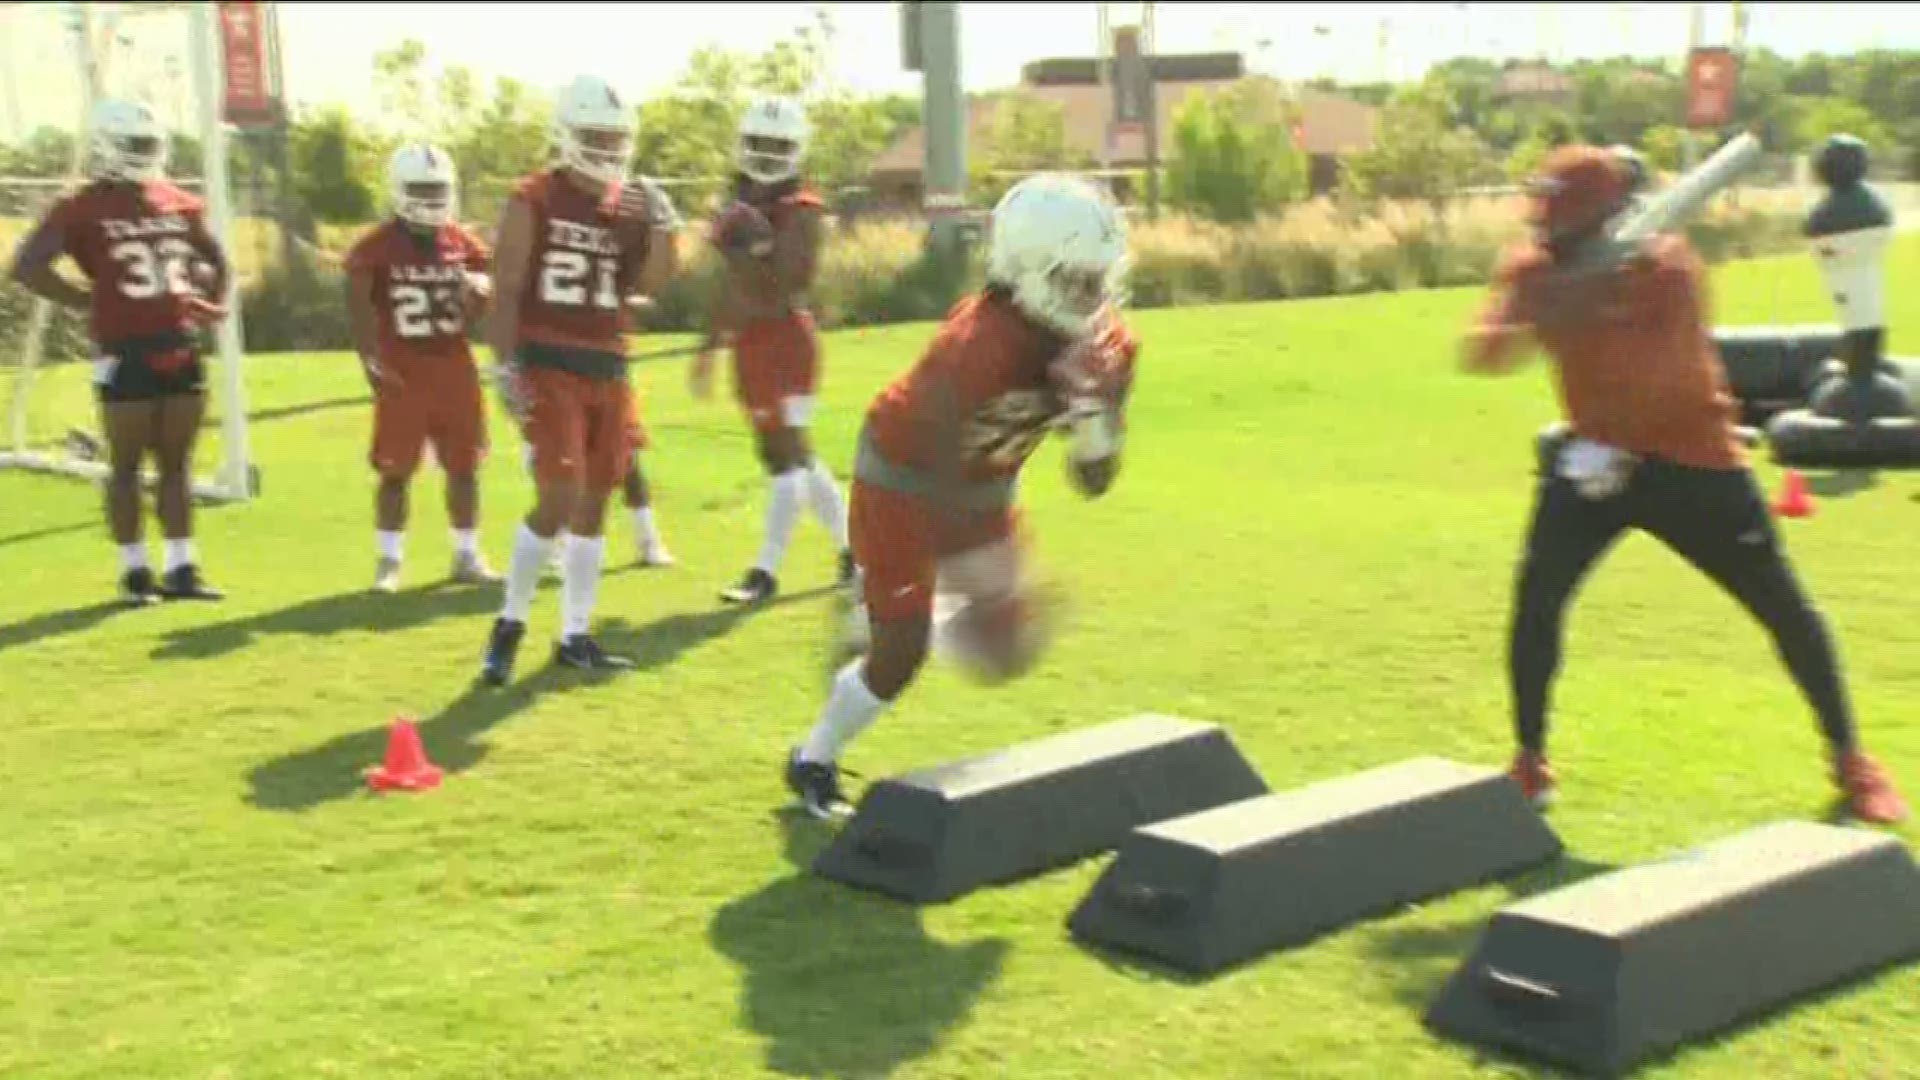 The big theme of Day 1 of the Longhorns' fall camp? Appreciating the culture they've built, but not resting on their accomplishments.